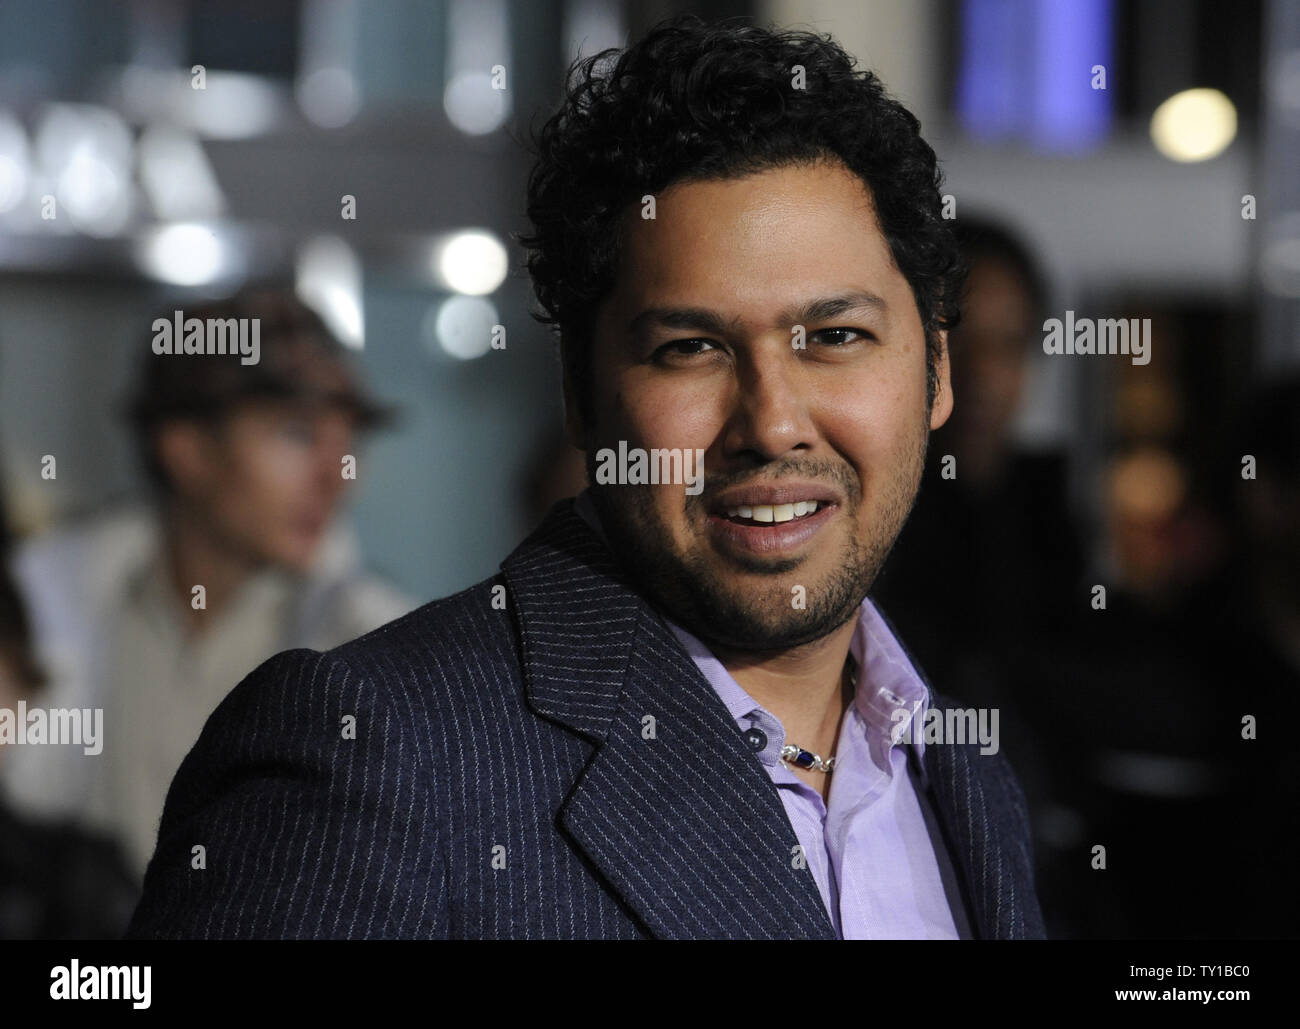 Cast member Dileep Rao attends the premiere of the film 'Avatar' in Los Angeles on December 16, 2009.      UPI/ Phil McCarten Stock Photo